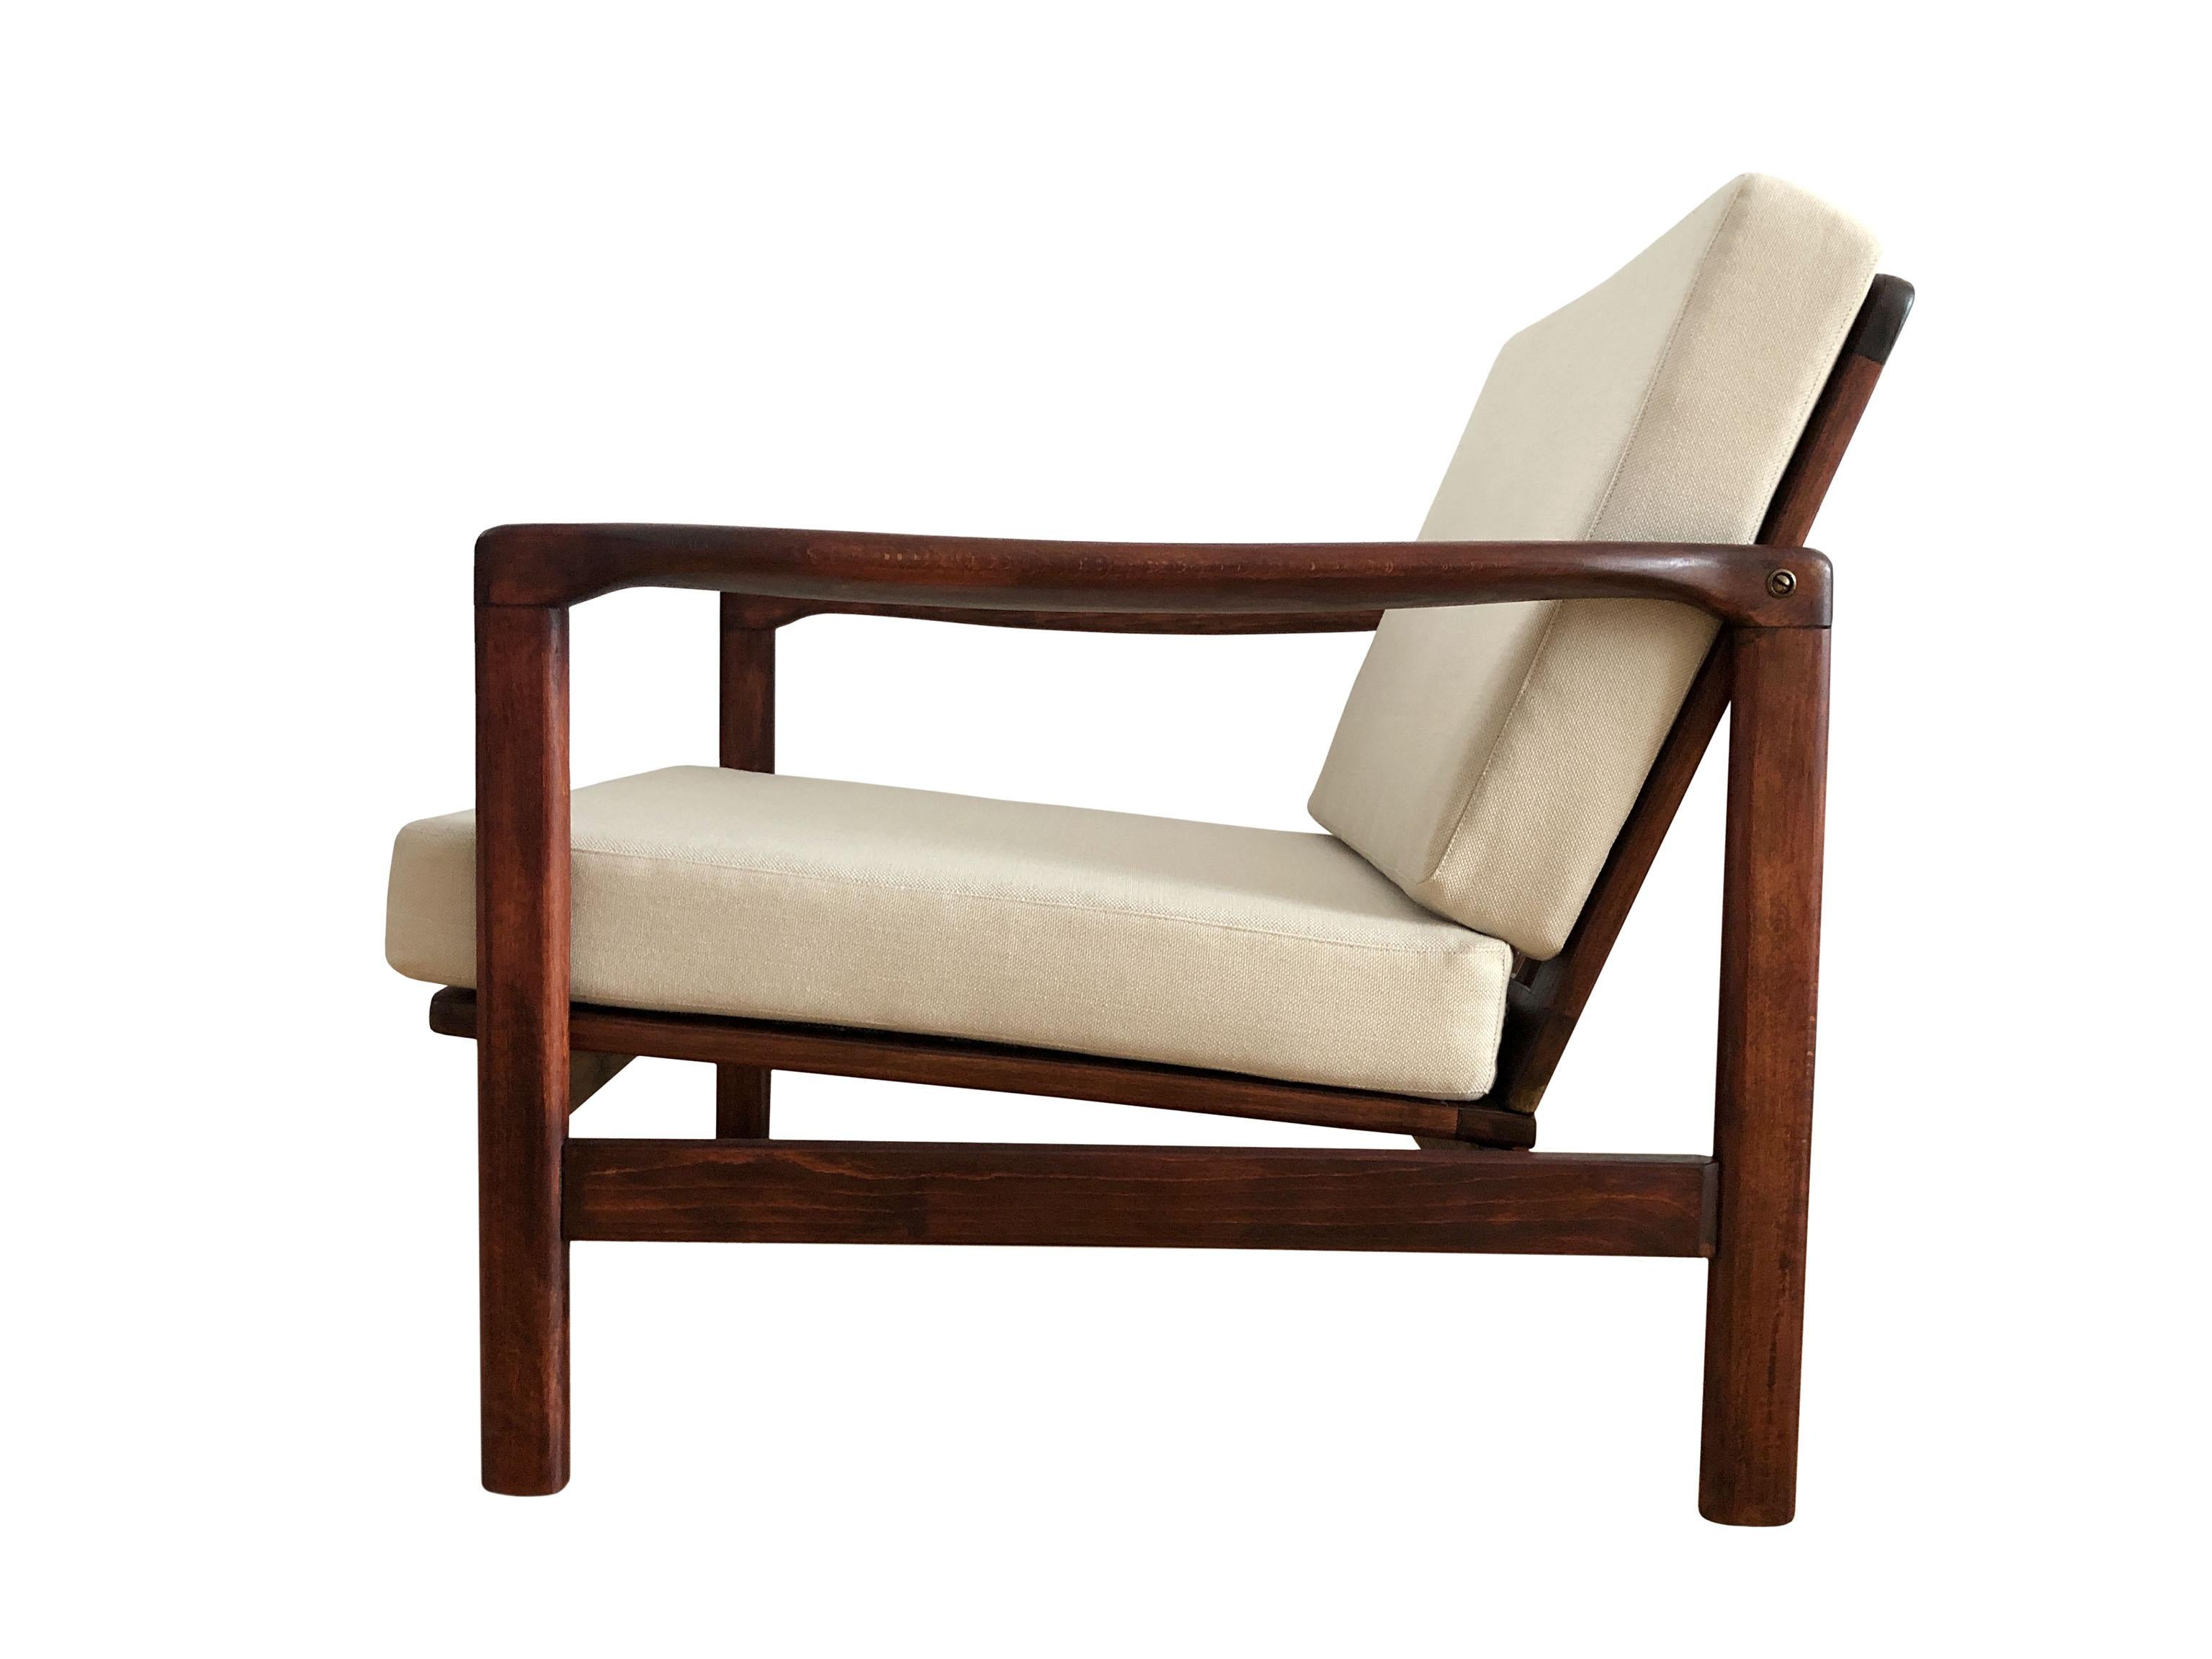 The set of two lounge chairs model B-7752, designed by Zenon Baczyk, has been manufactured by Swarzedzkie Fabryki Mebli in Poland in the 1960s. The structure is made of beech wood in palisander color, finished with a semi matte varnish. The